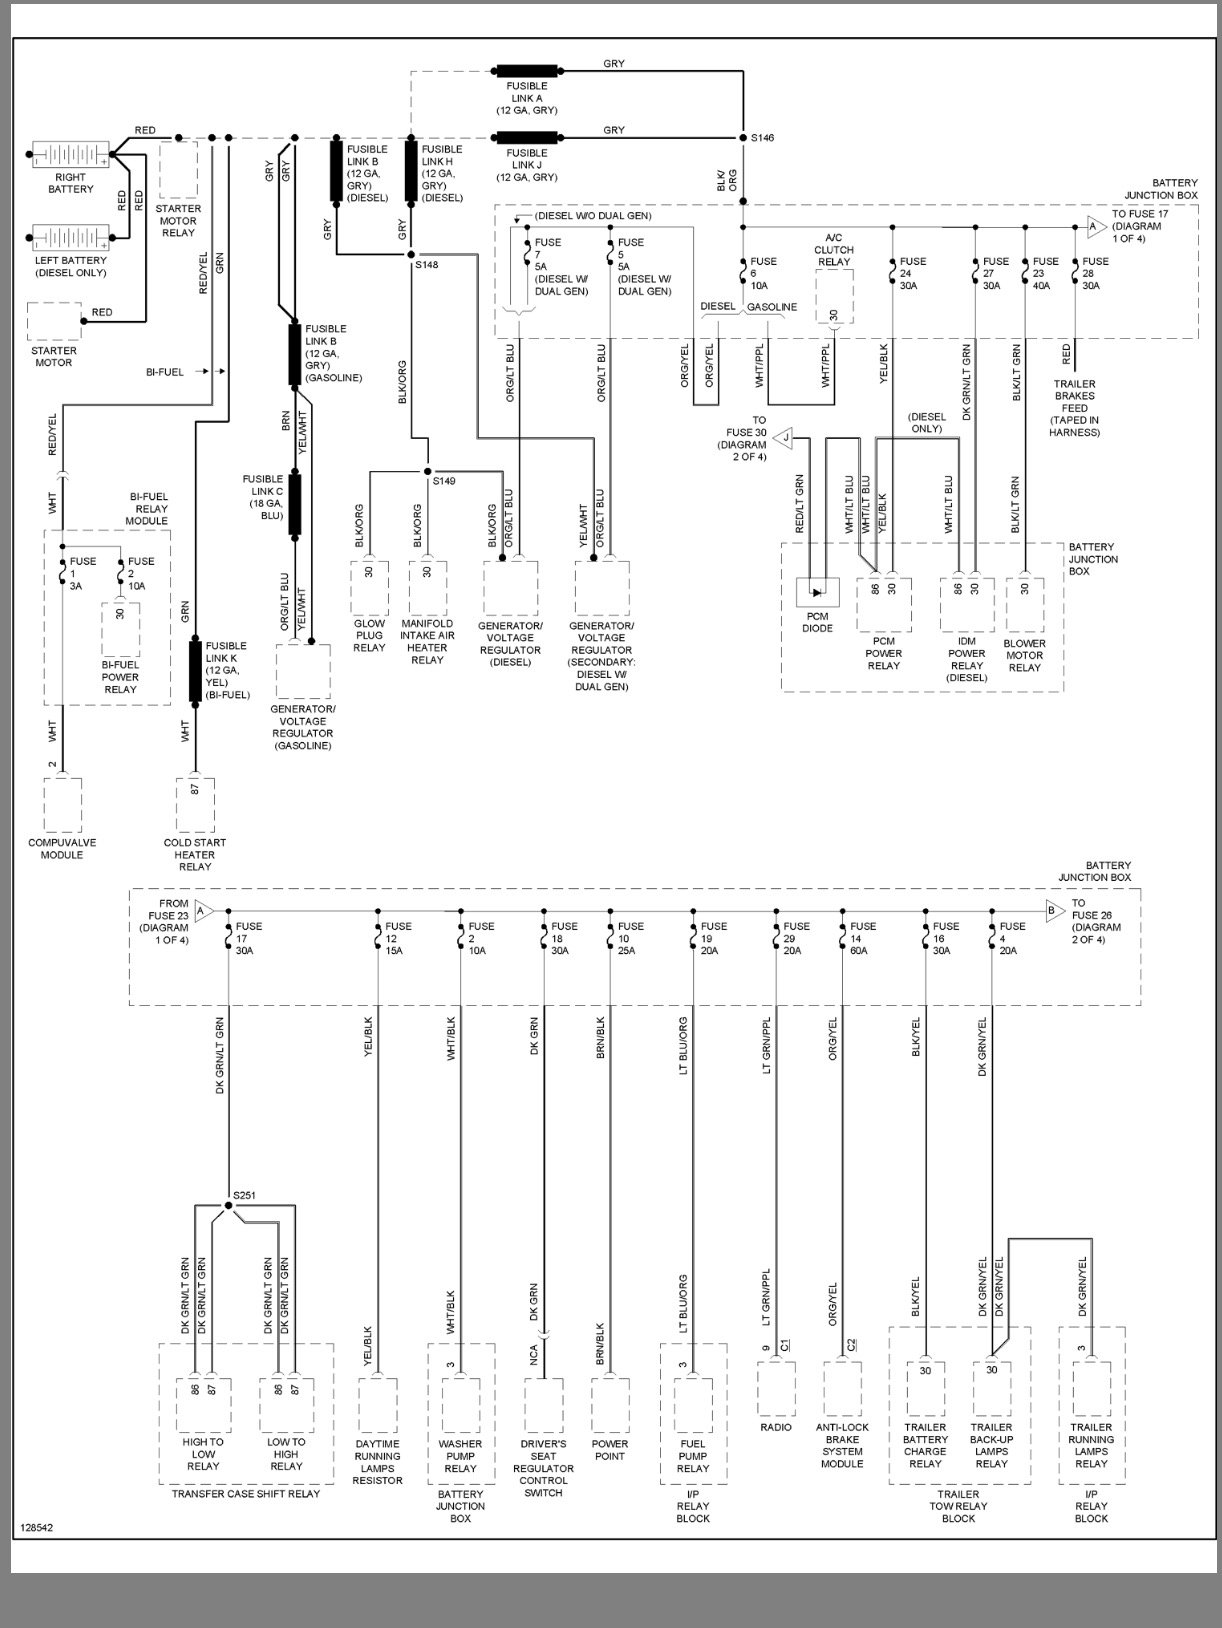 Charging System Fusible Links - where are they? - Page 2 - Ford Truck